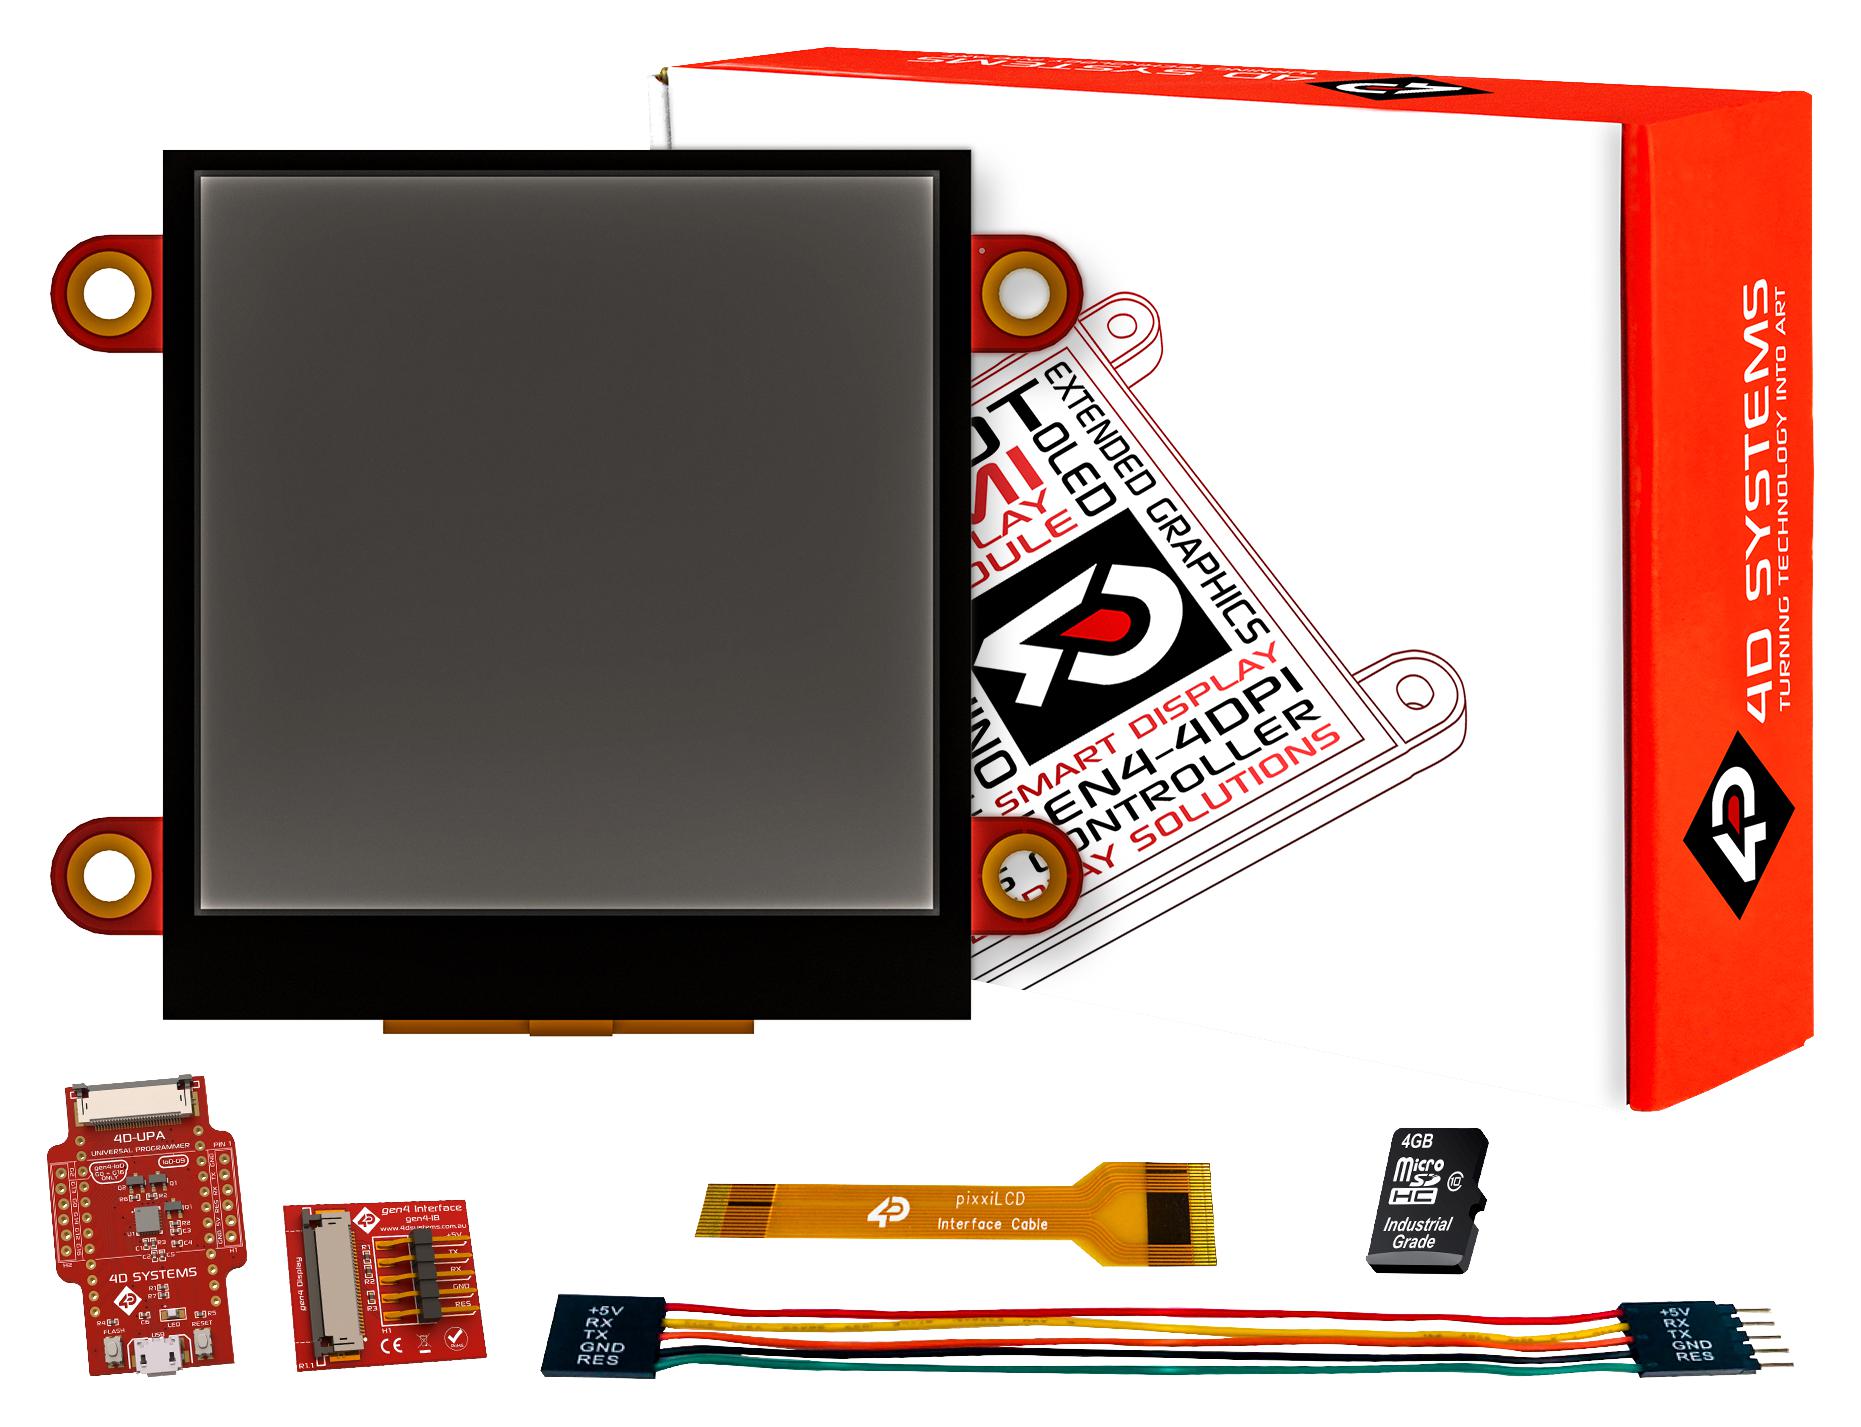 SK-PIXXILCD-25P4-CTP STARTER KIT, 2.5" GRAPHIC DISPLAY, CTP 4D SYSTEMS